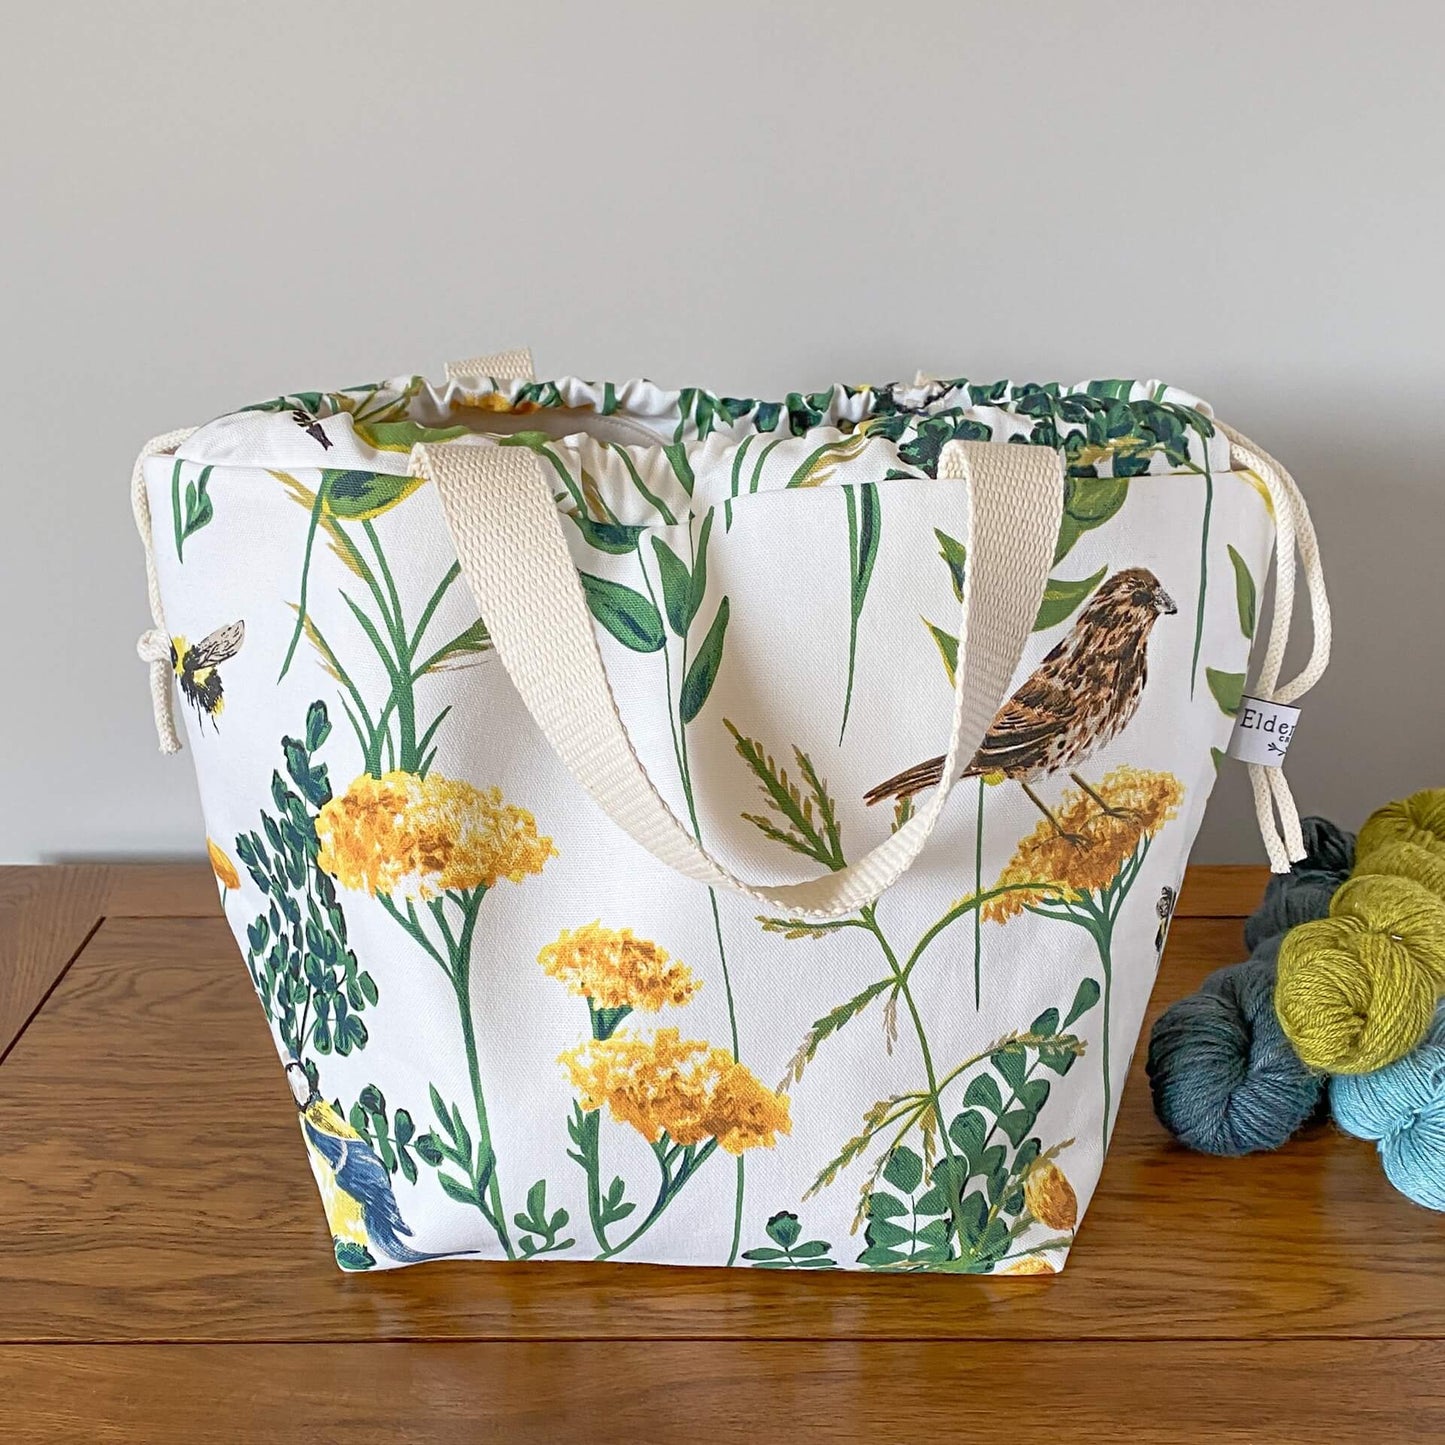 A draswtring bag is seen on a table next to some yarn. The handles of the bag hang down. The bag is made from a print of a summery scene with foliage and birds and bees. On this bag there is a song thrush and a blue tit. 